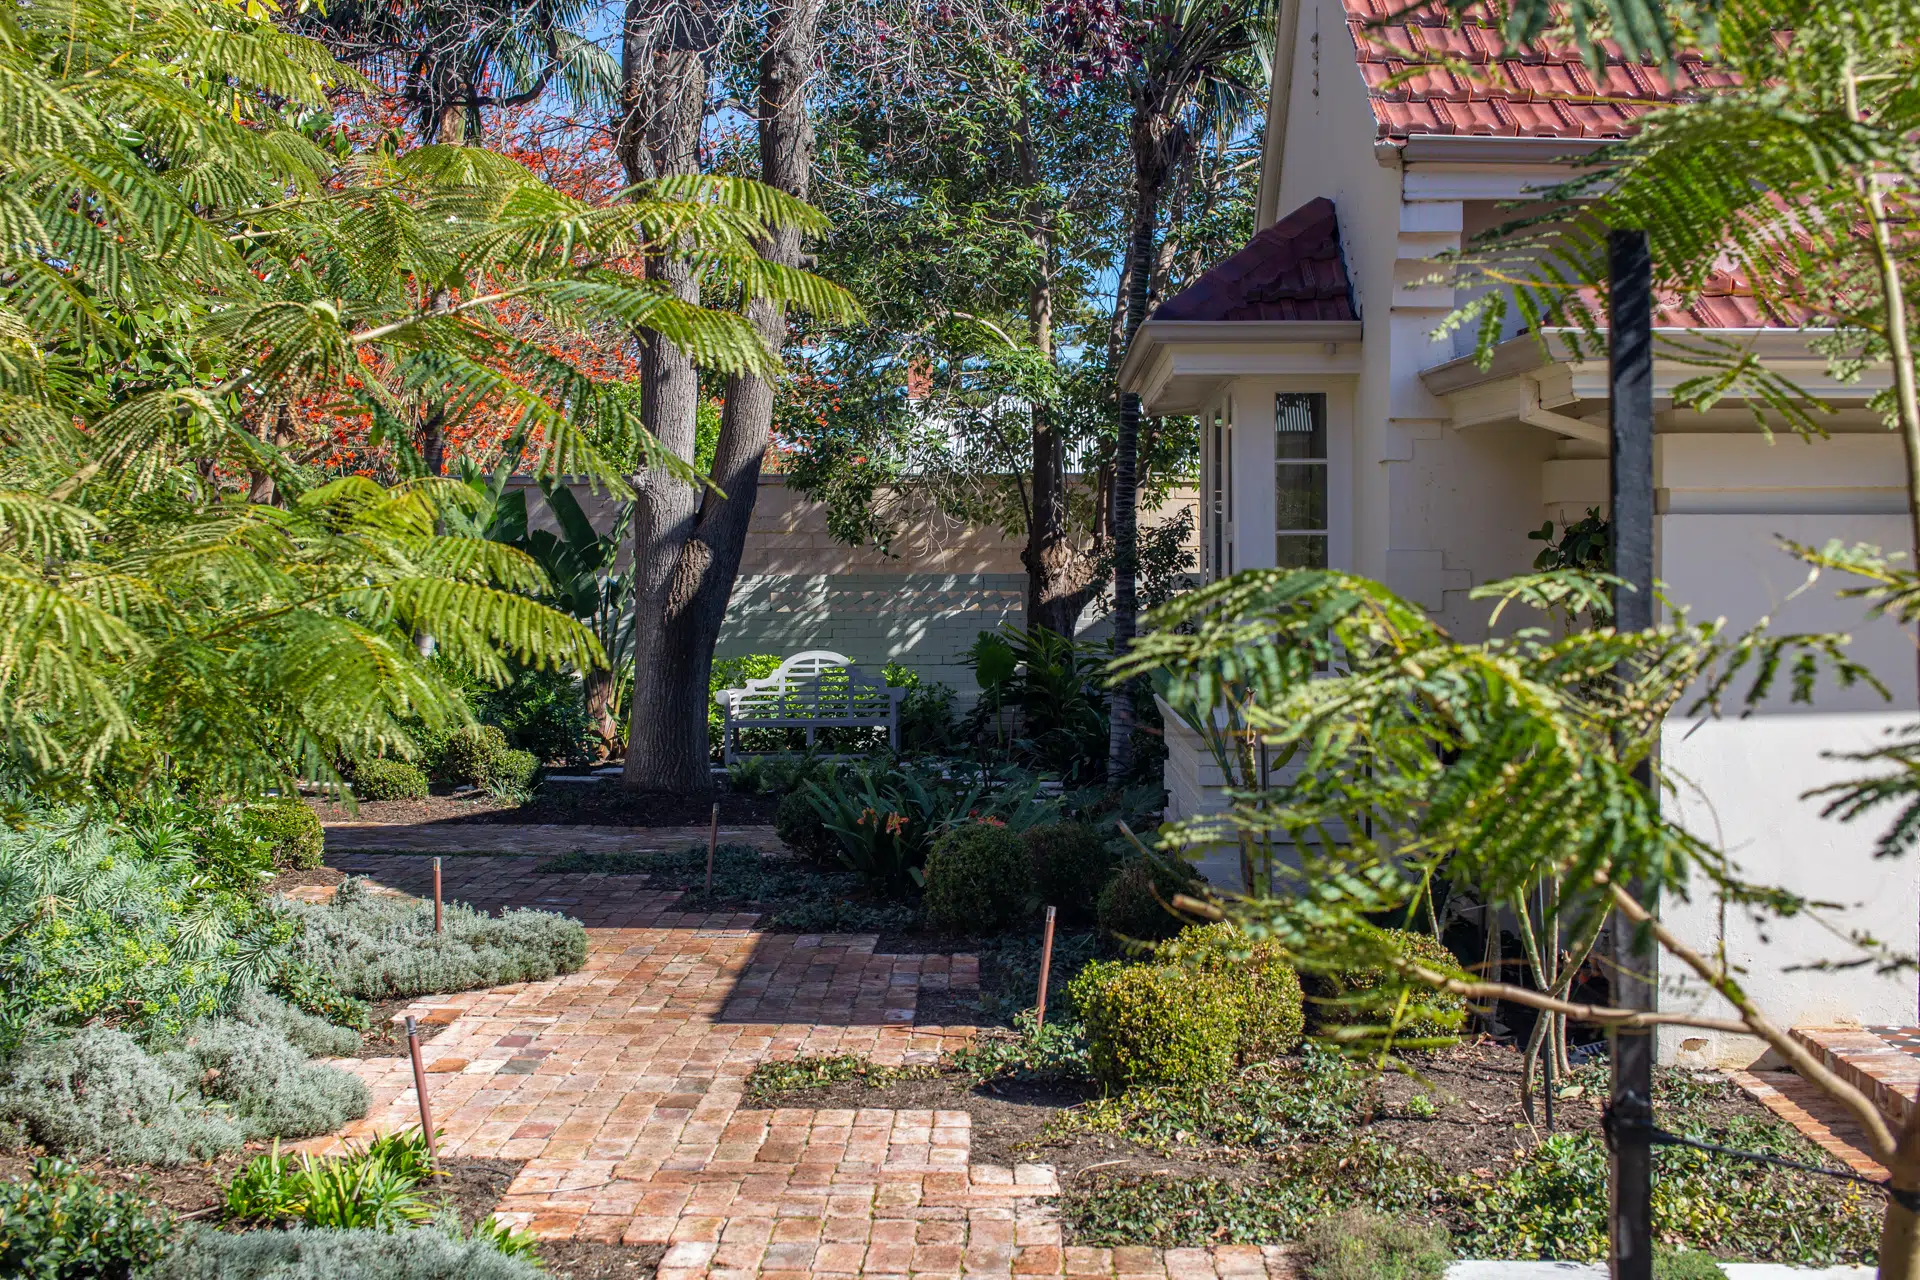 the claremont landscape with rustic brick paving and planting